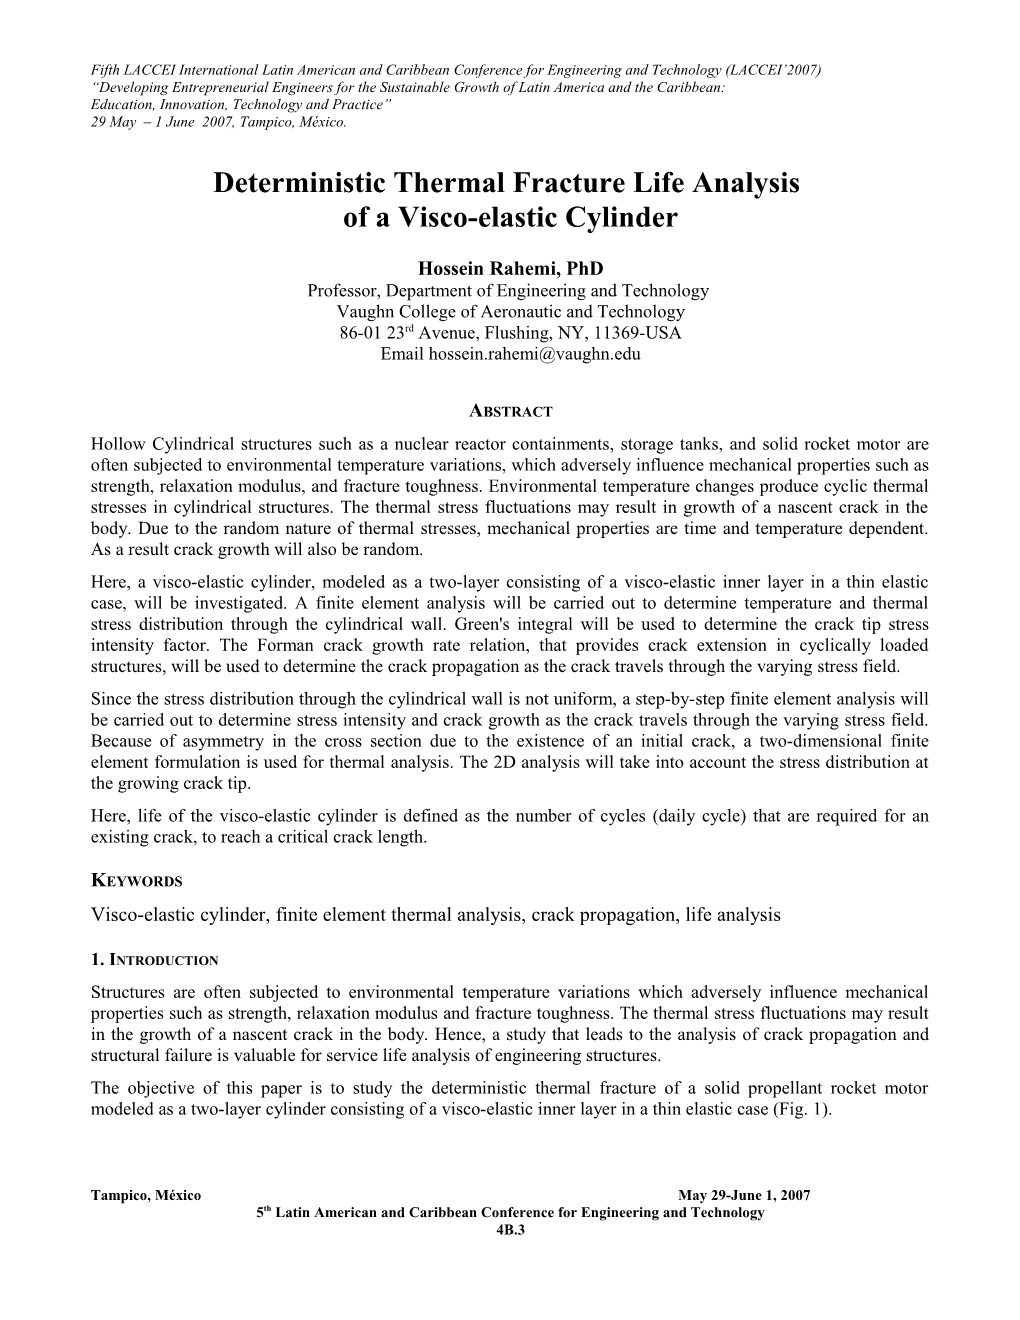 Deterministic Thermal Fracture Service Life Analysis of a Visco-Elastic Cylinder